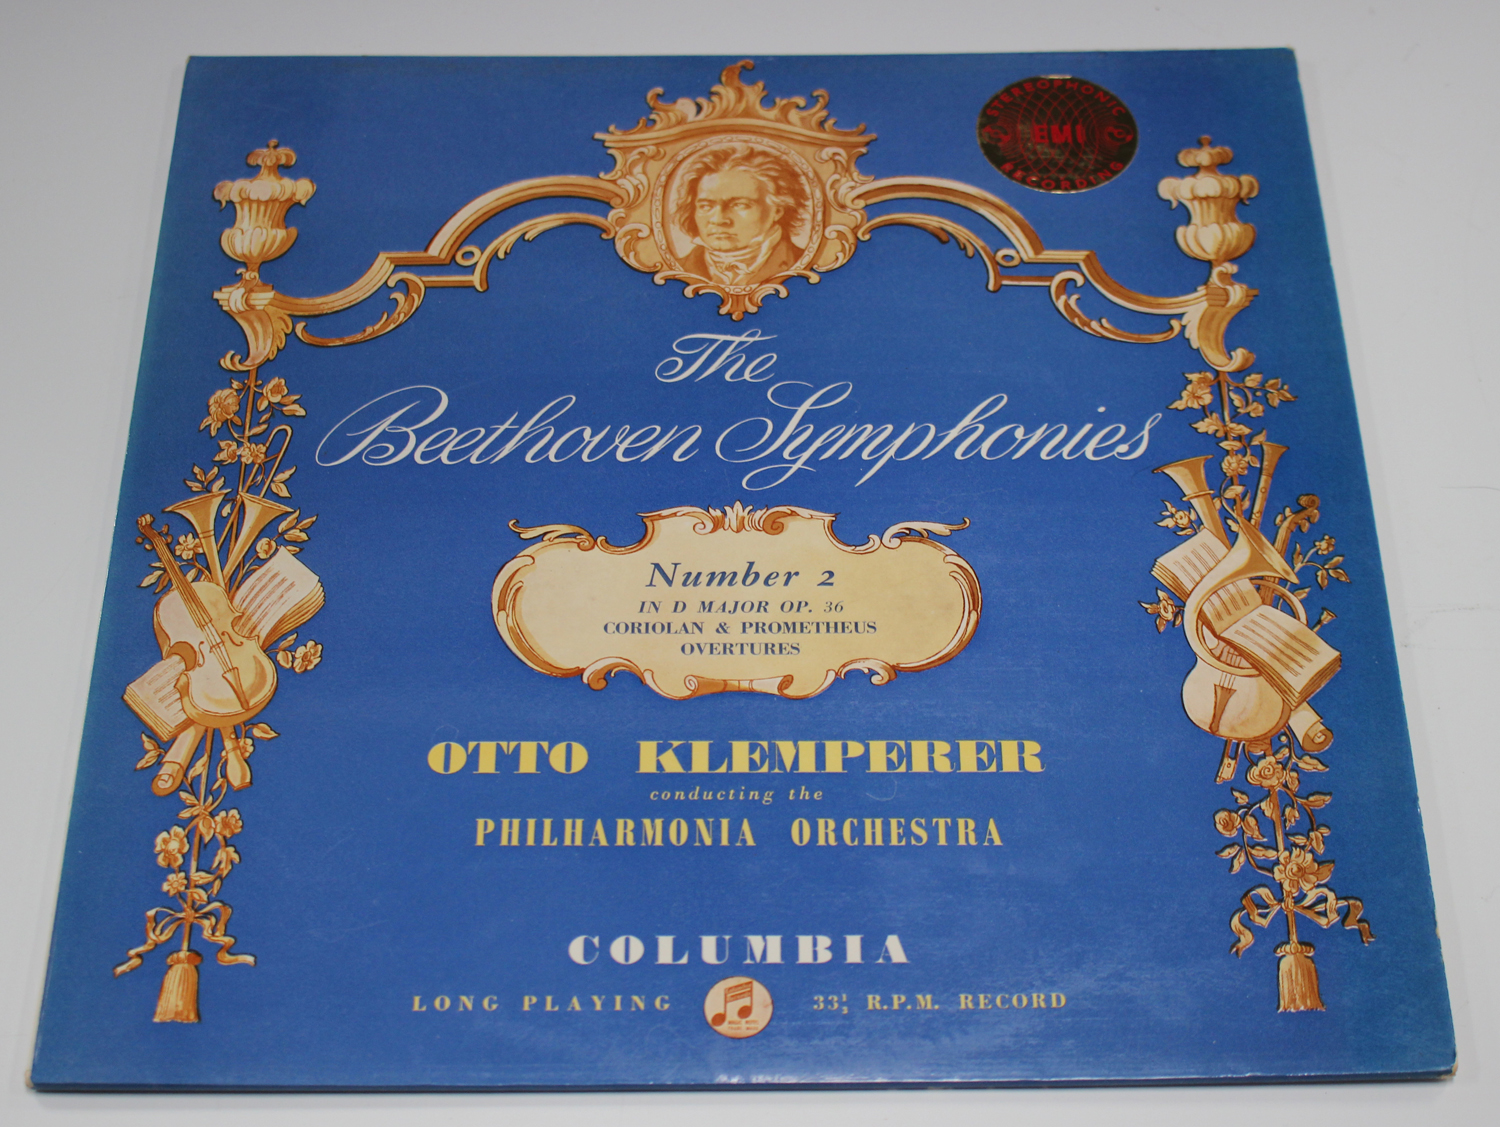 A group of five classical LP records, all Columbia stereo first pressings with blue and silver